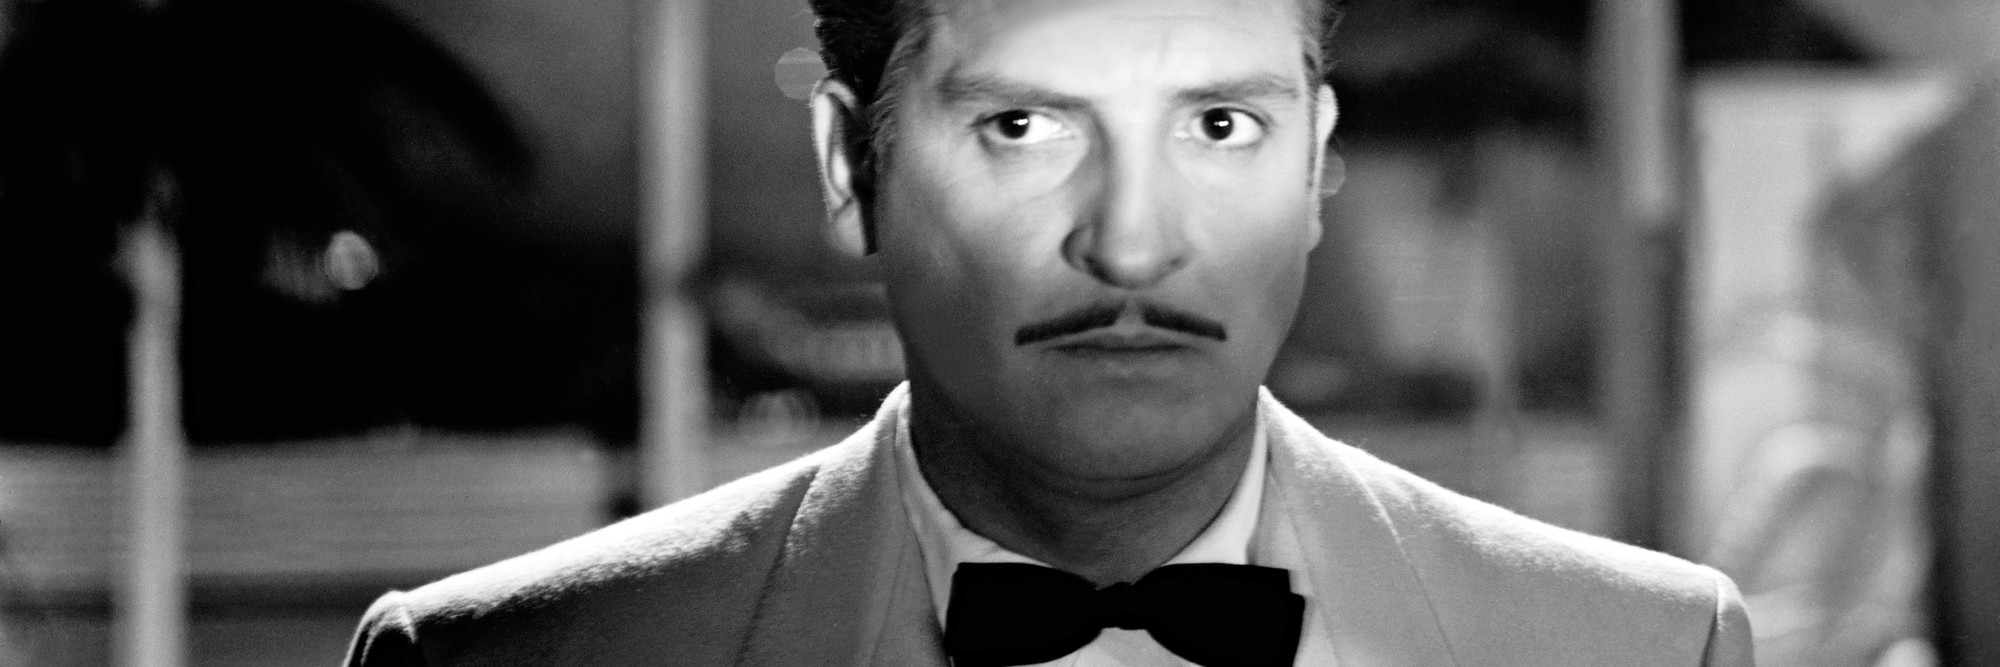 La otra (The Other One). 1946. Mexico. Directed by Roberto Gavaldón